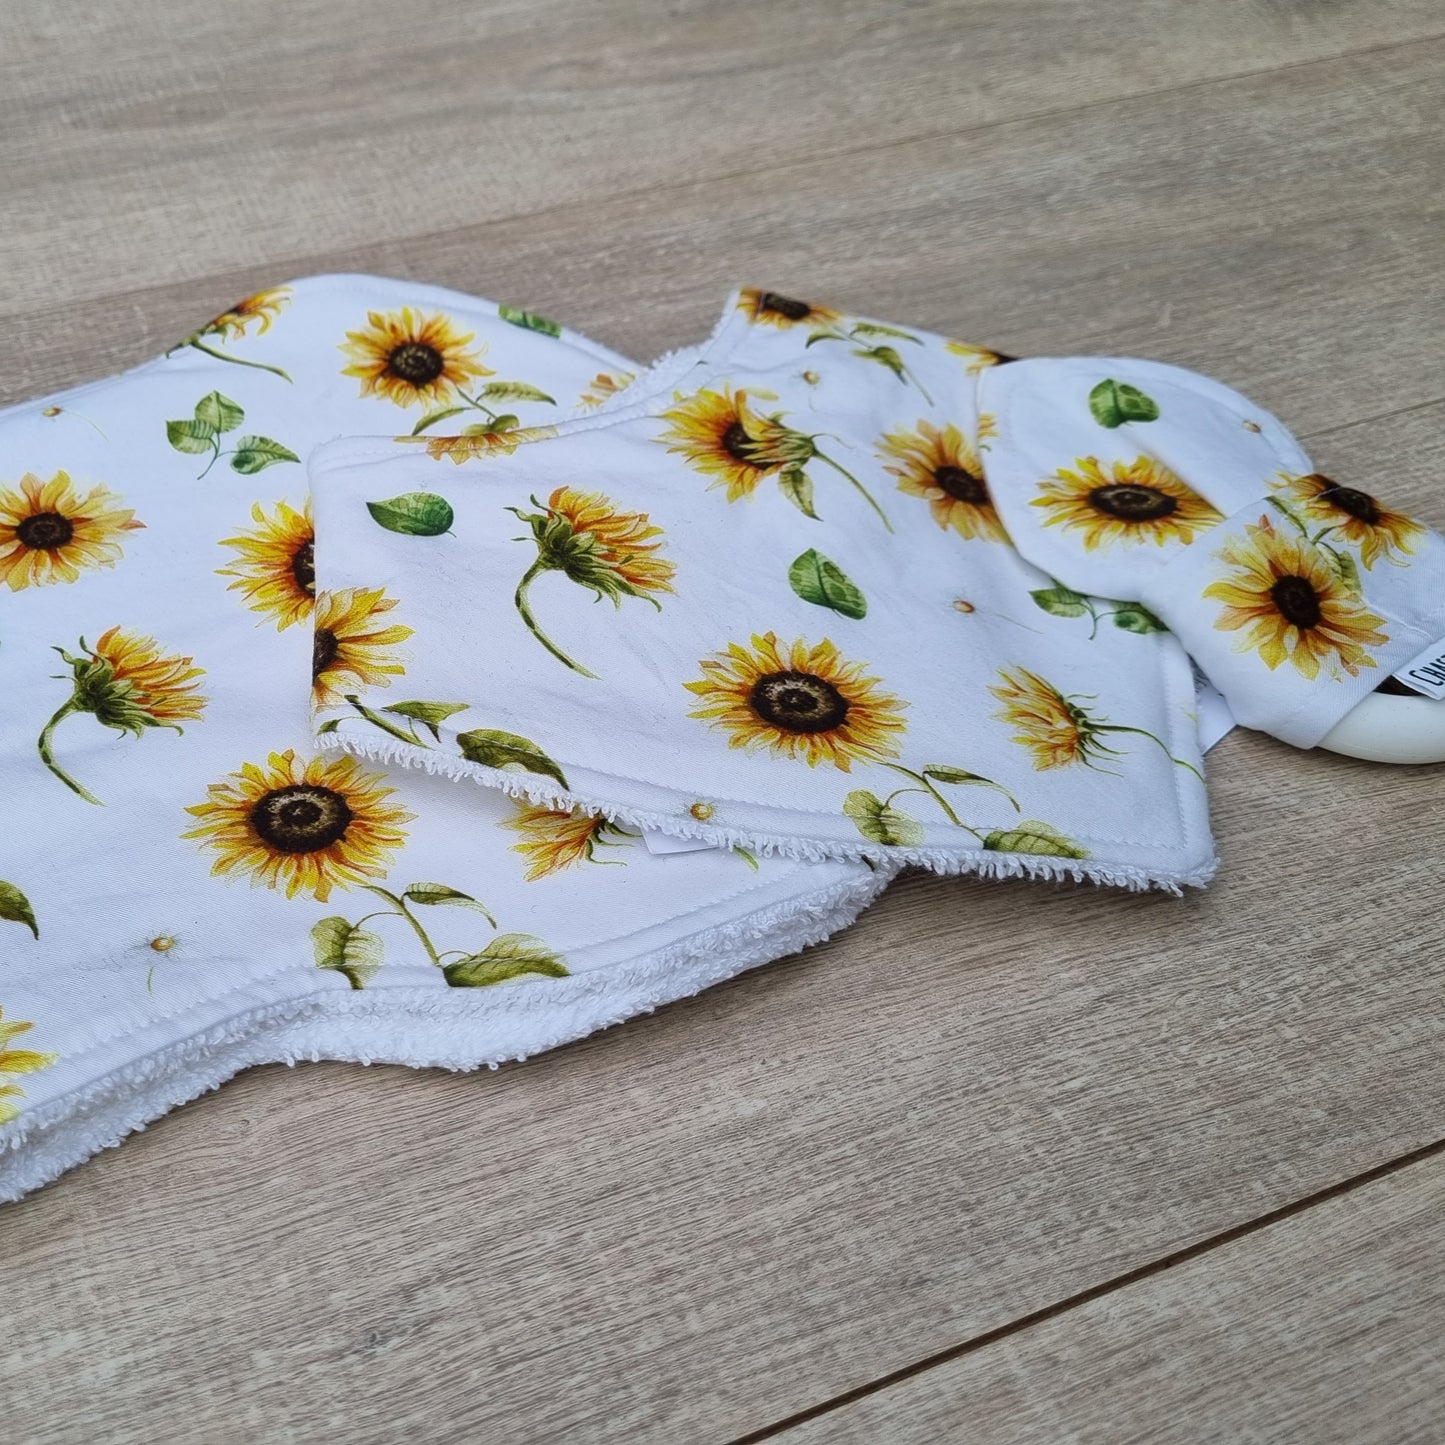 3 Piece Gift Set - Sunflowers against wooden backdrop. Yellow sunflowers on white background. Each set contains 1x Burp Cloth, 1x Dribble Bib and 1x Teether.